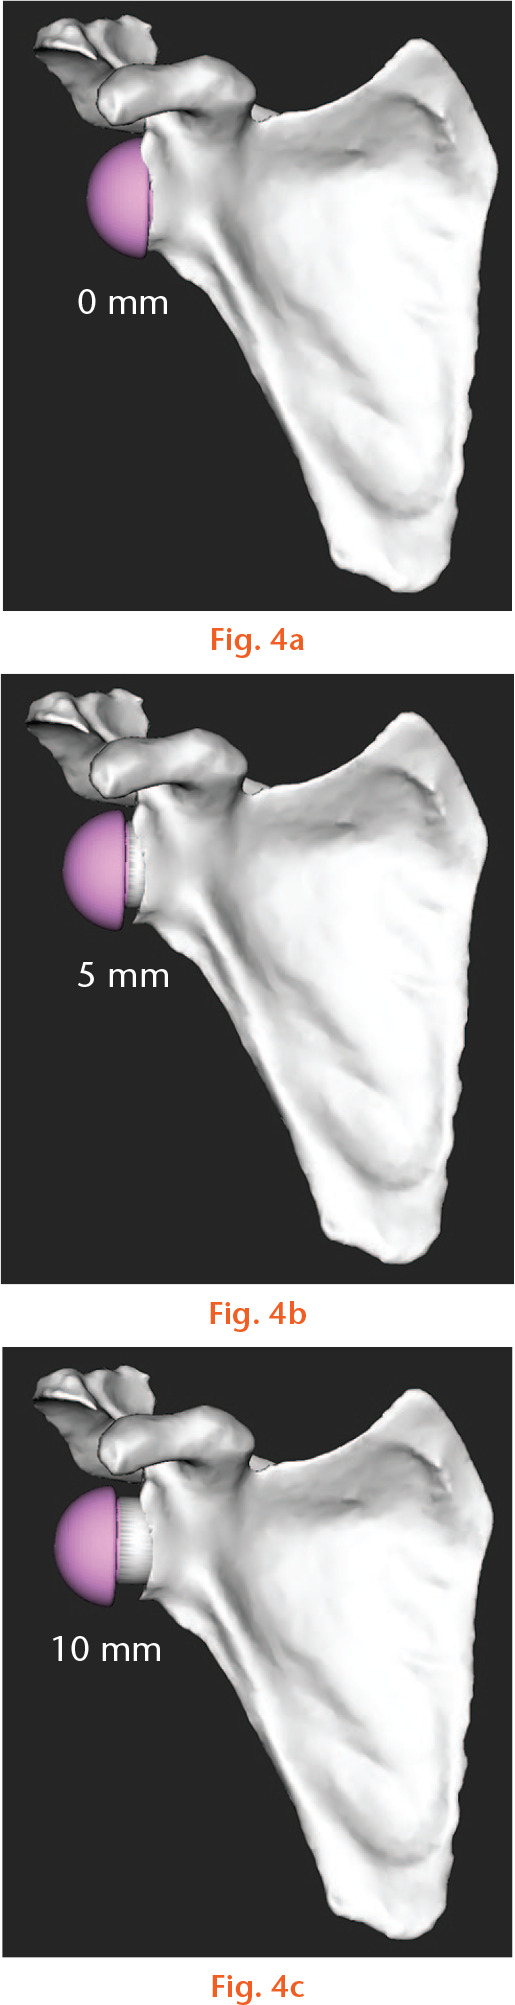 Fig. 4 
            The three glenoid lateralizations evaluated: a) 0 mm; b) 5 mm; and c) 10 mm.
          